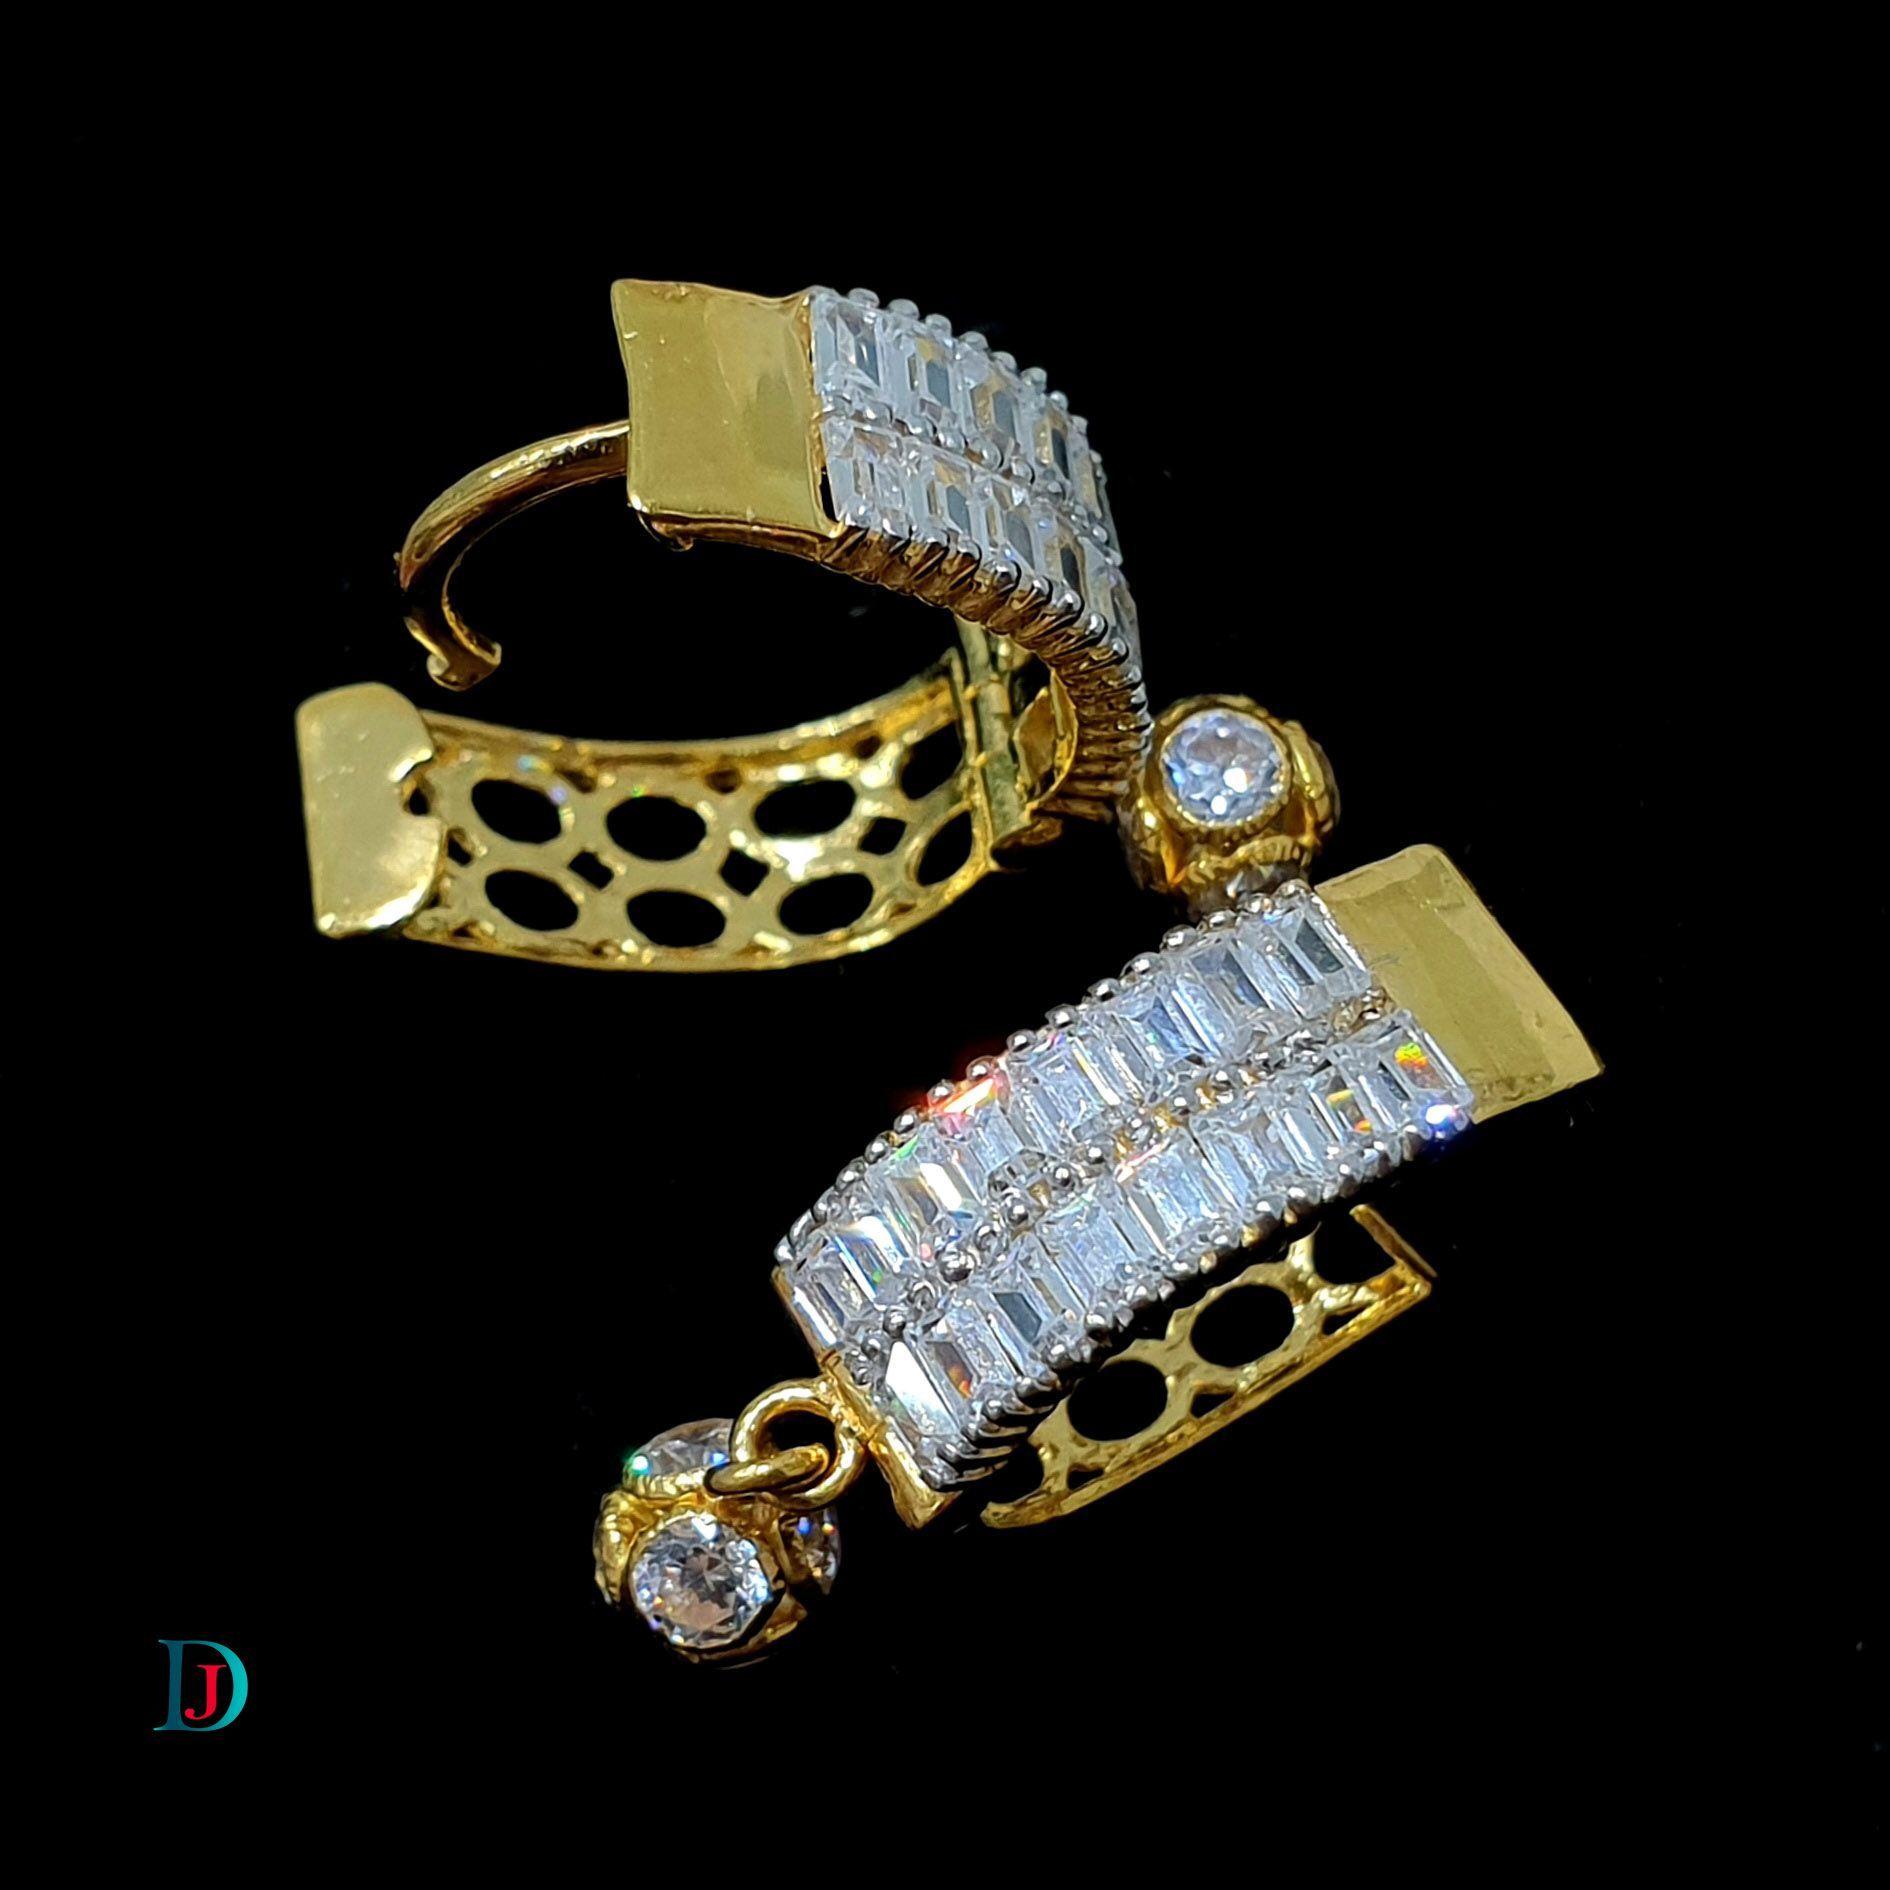 New and Latest Design of Desi Indian Rajasthani Gold Baali/Earrings 